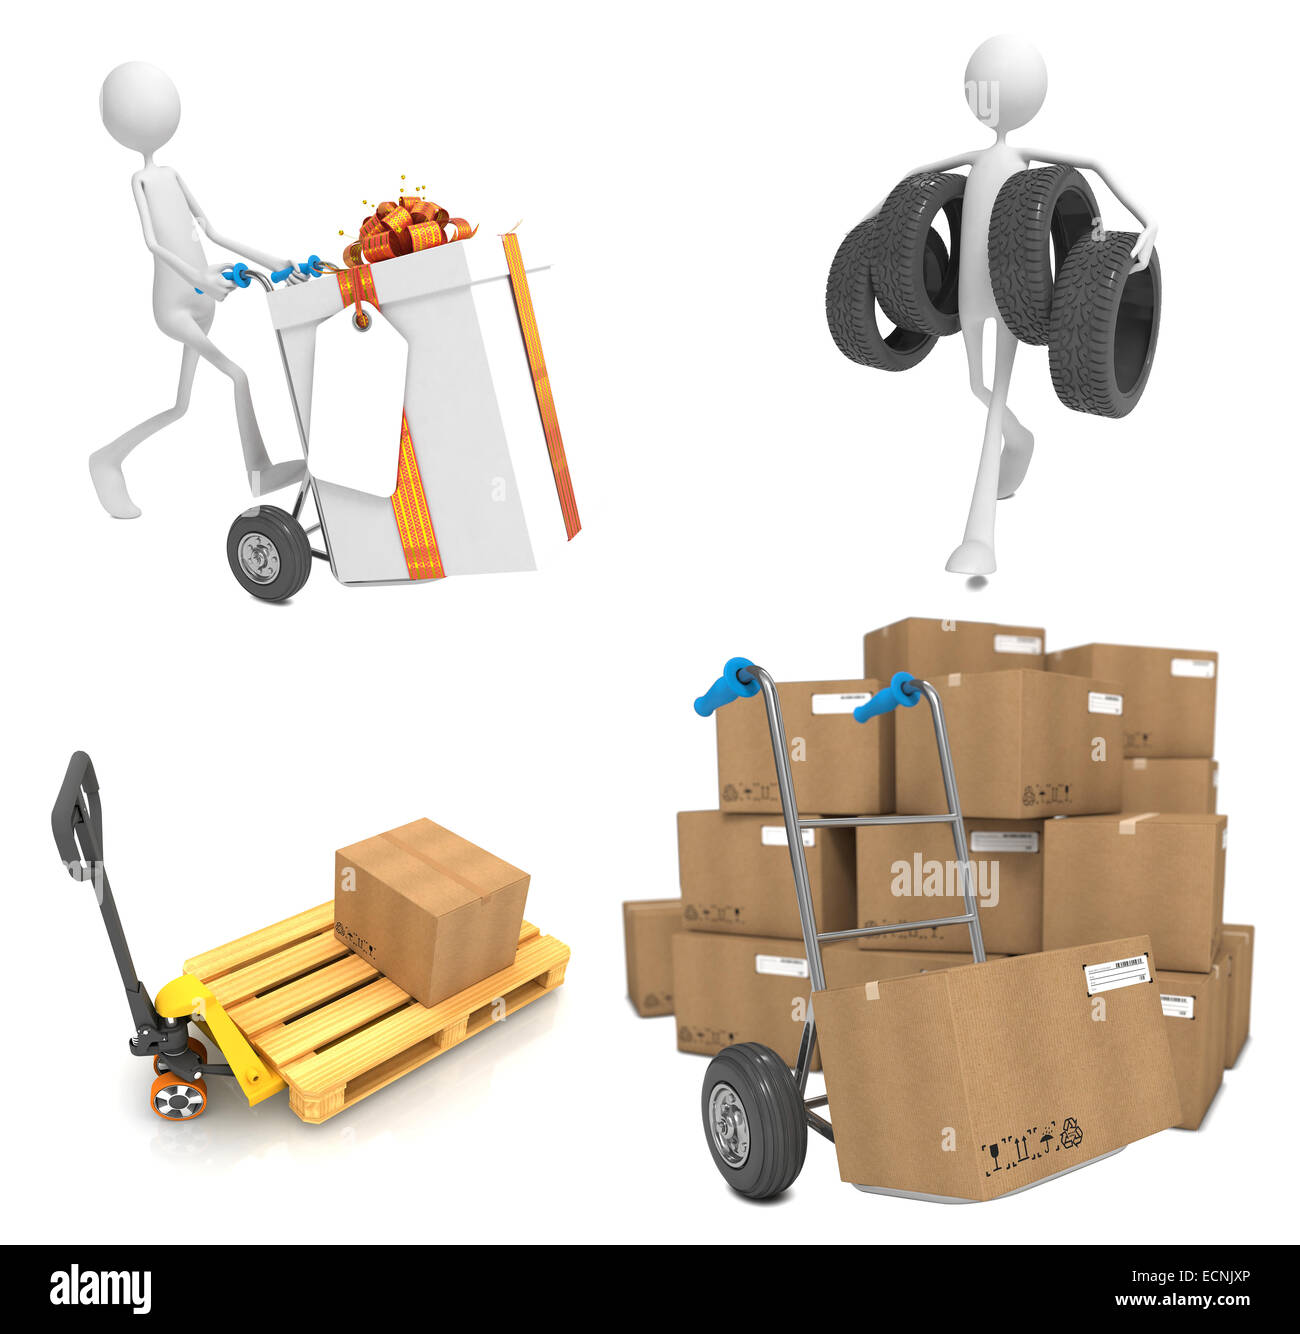 Delivery Concepts - Set of 3D Illustrations. Stock Photo